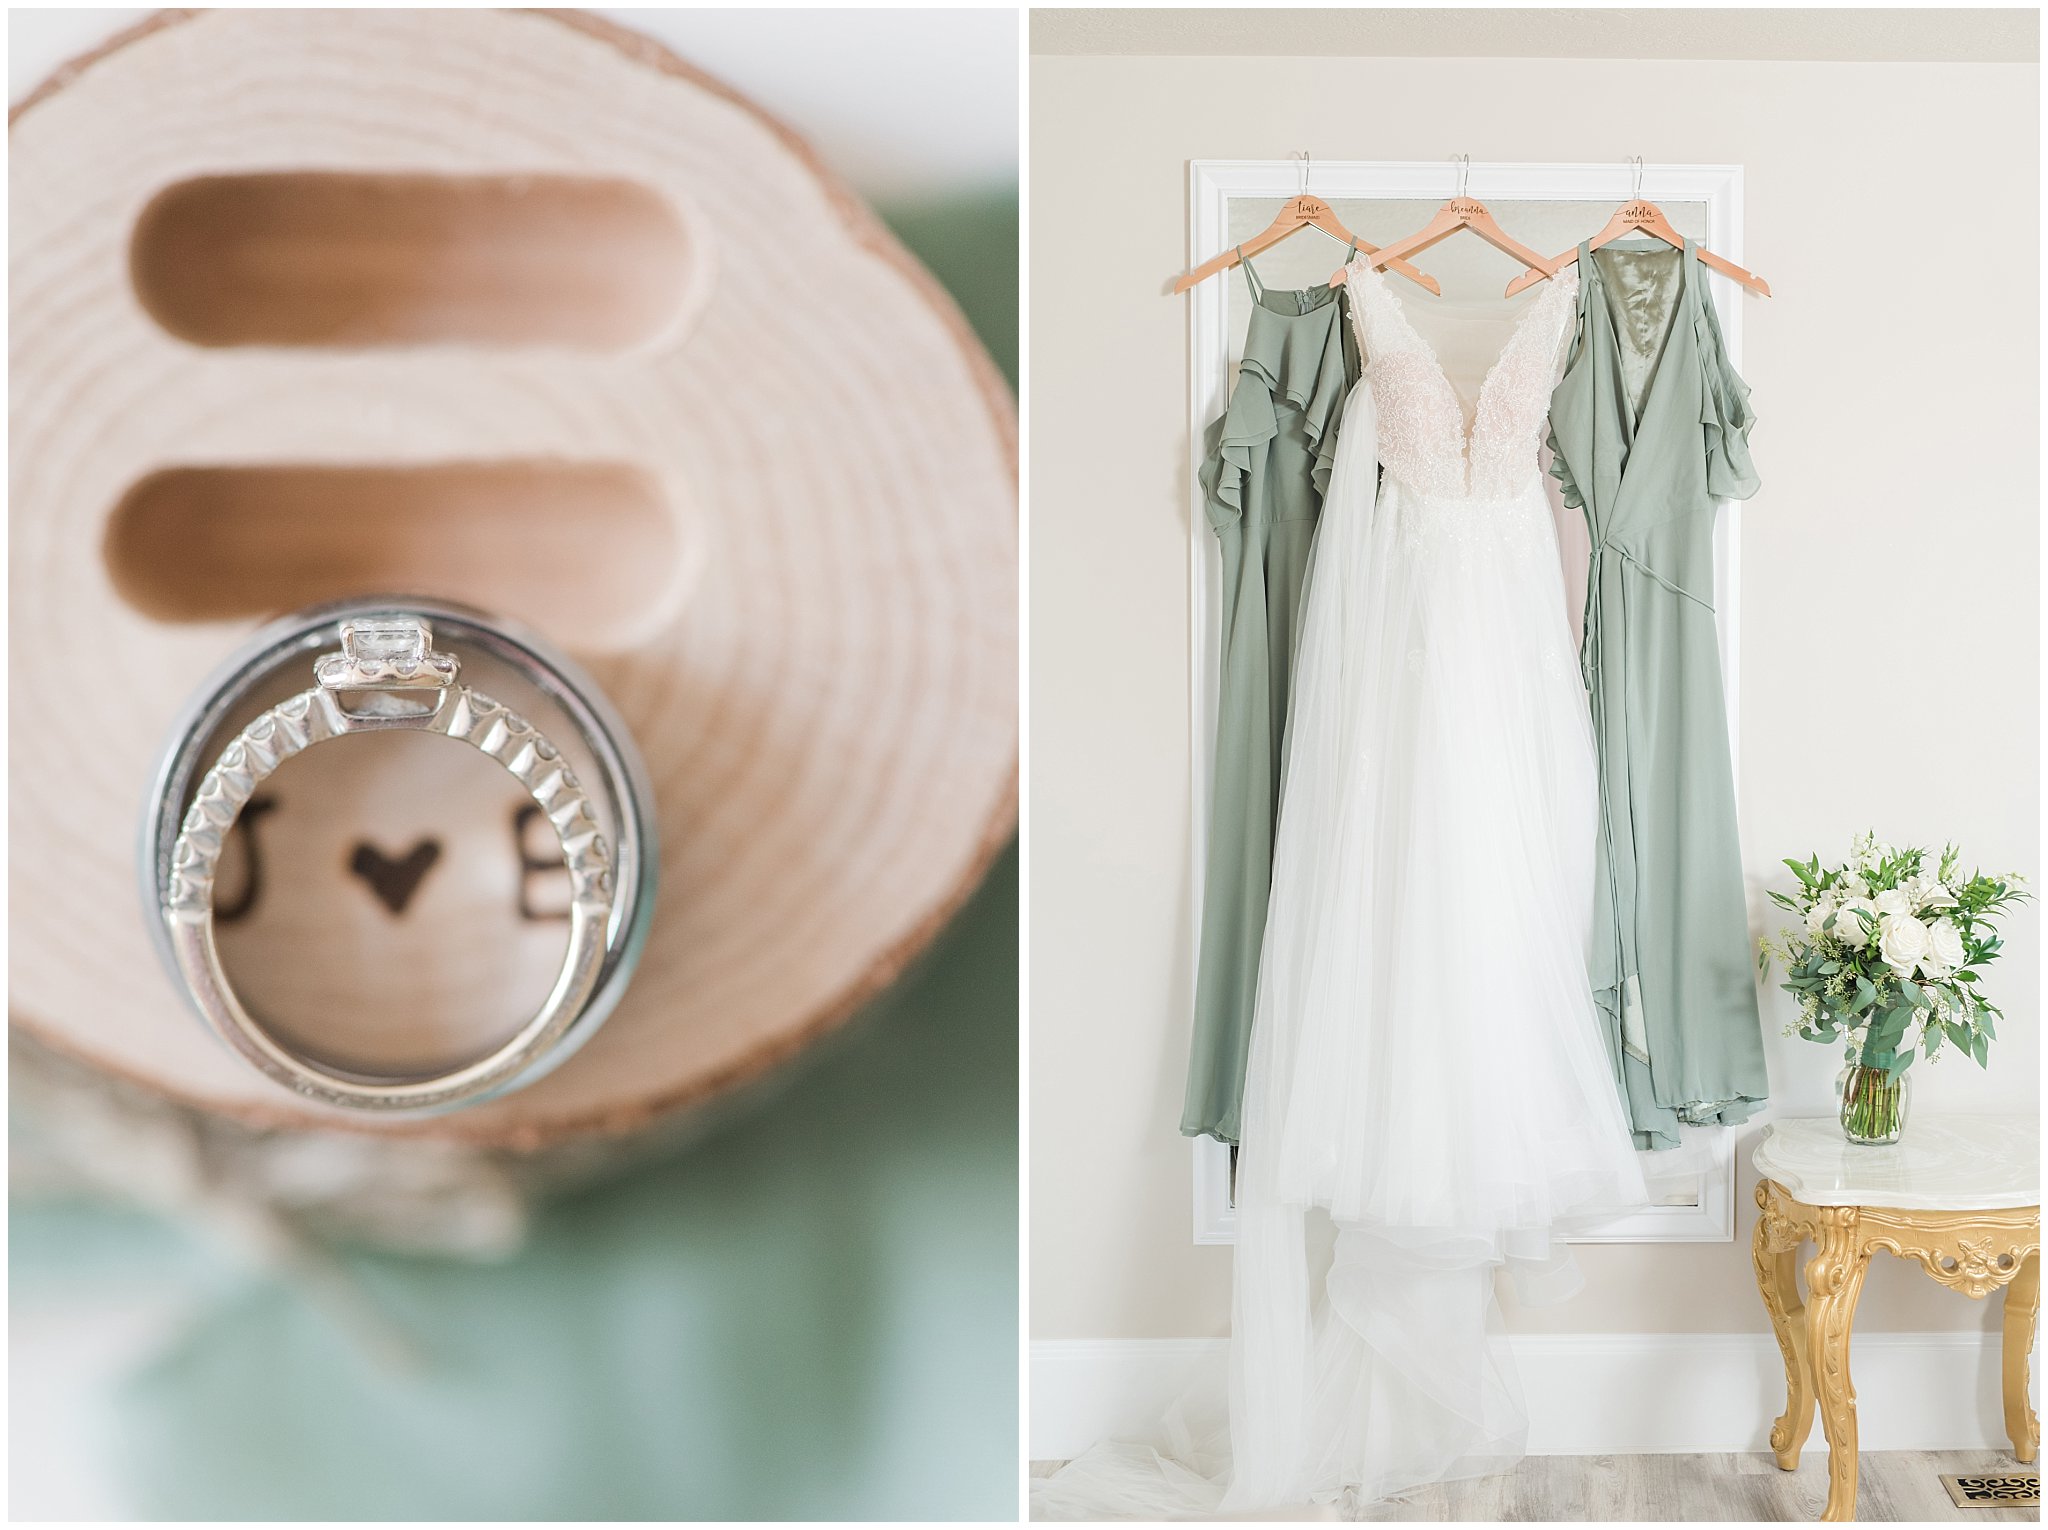 Wedding dress custom hangers with names and sage green bridesmaid dresses | Sage Green and Gray Summer Wedding at Oak Hills | Jessie and Dallin Photography